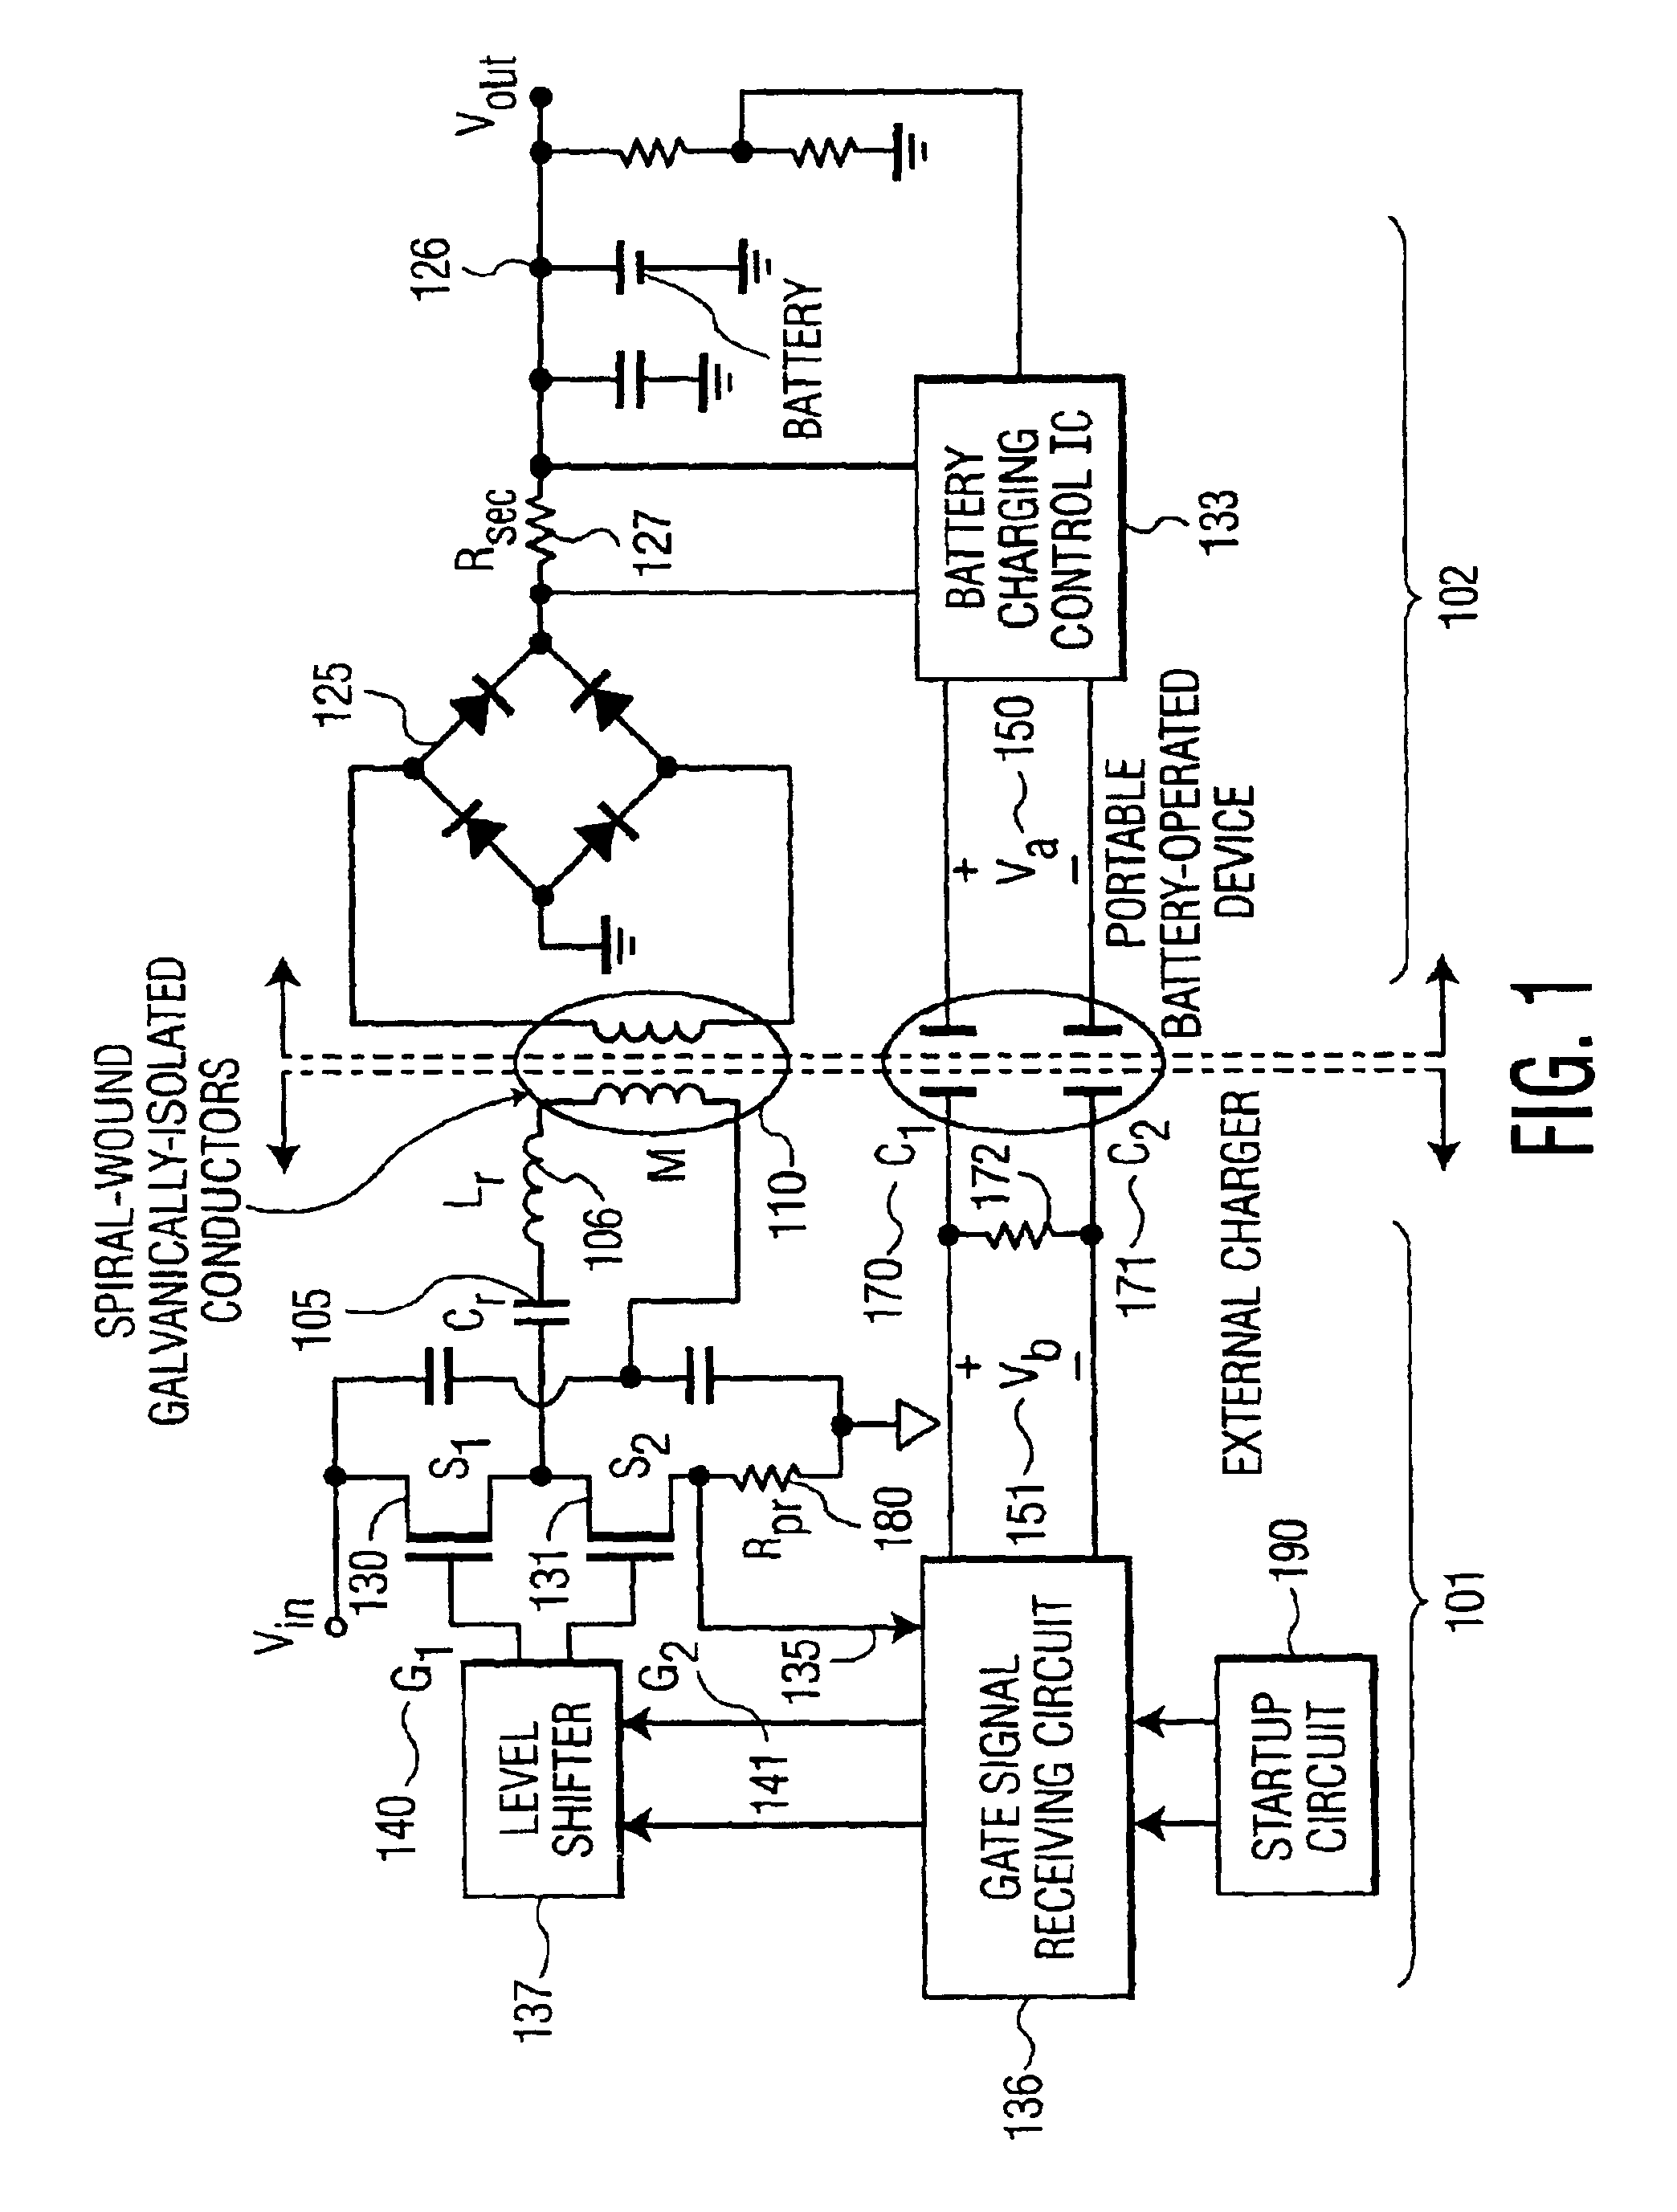 System, method and apparatus for contact-less battery charging with dynamic control